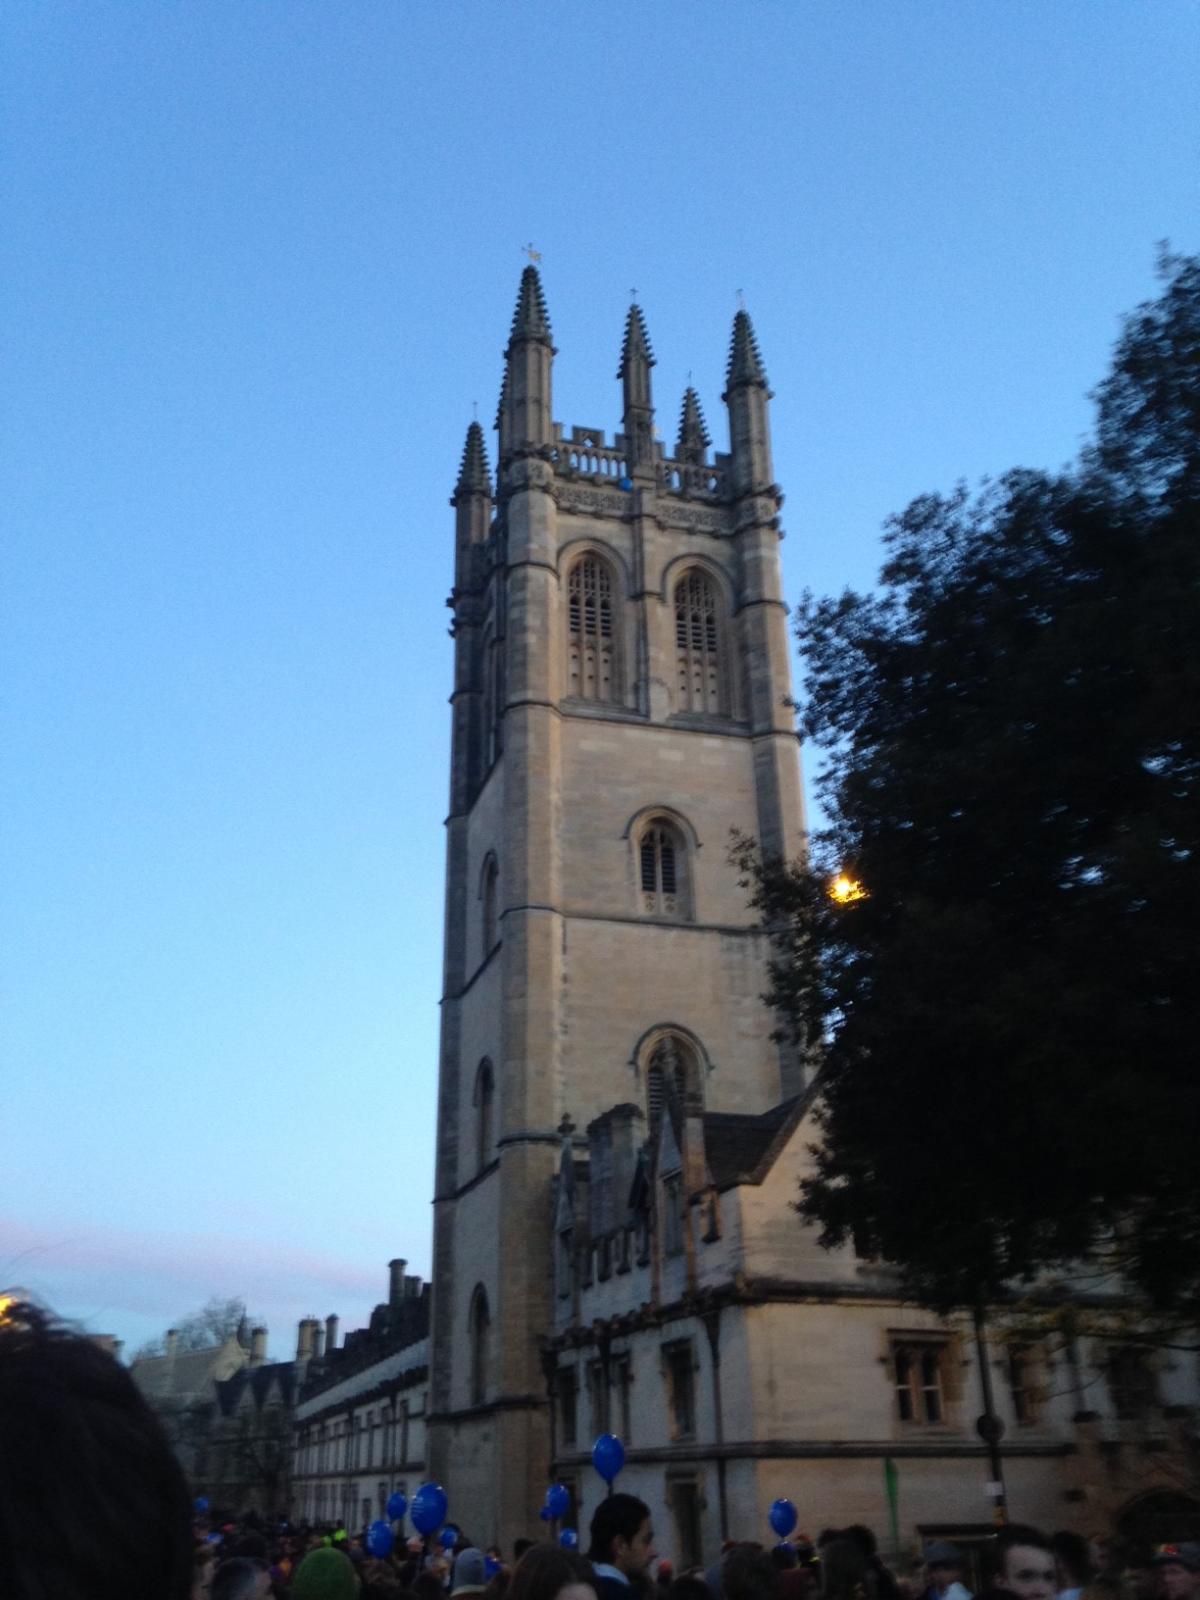 The sun begins to rise at Magdalen College.